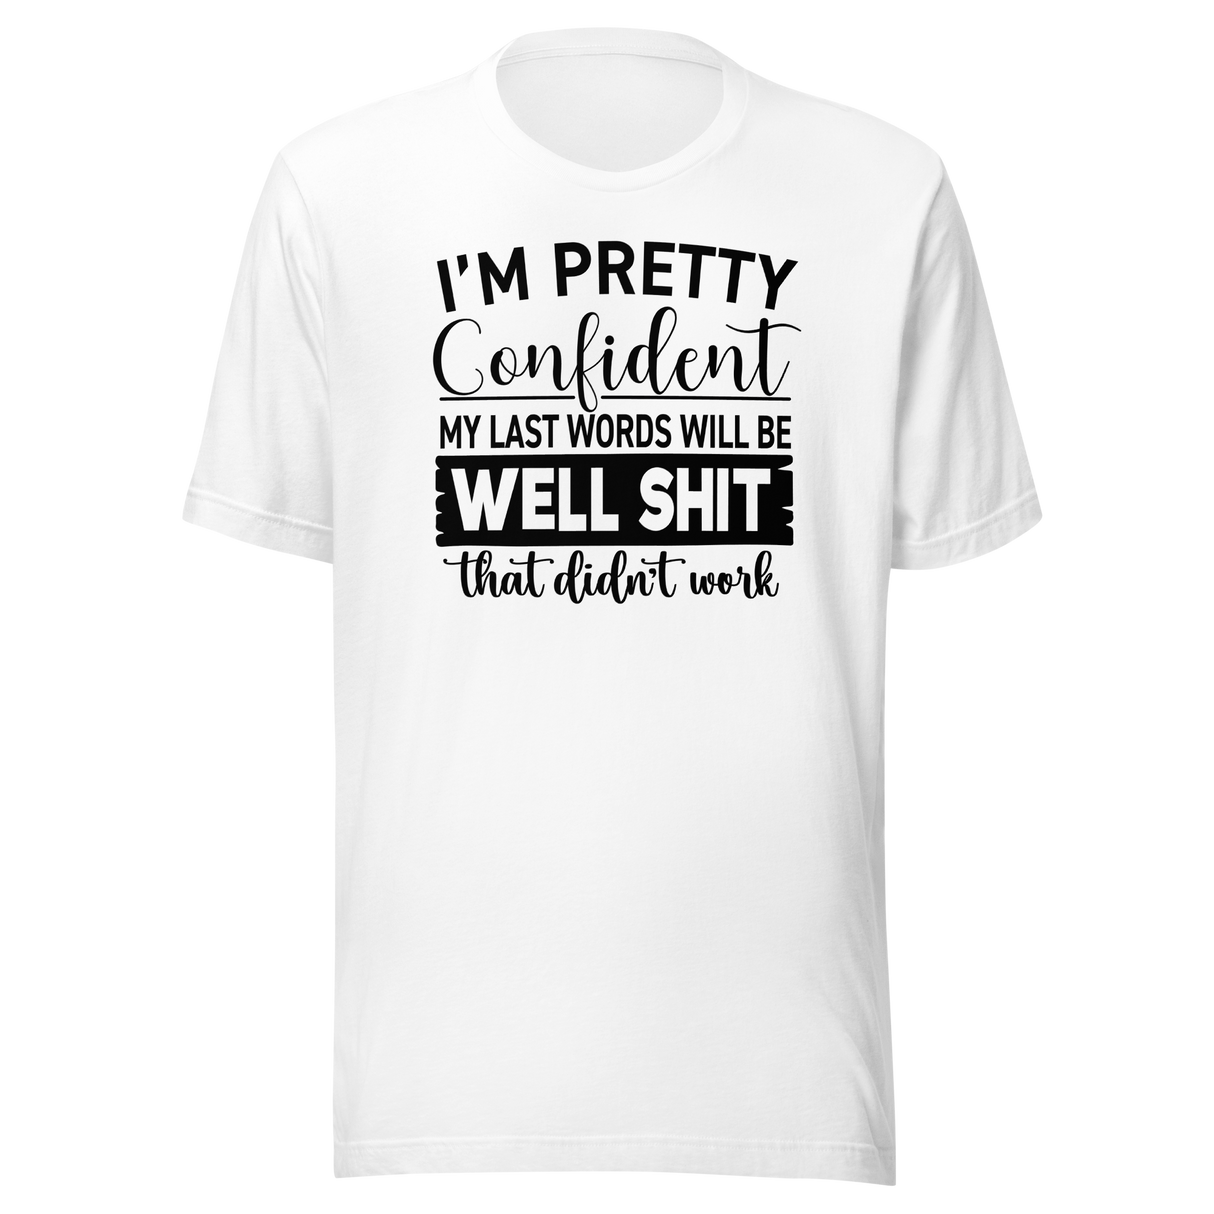 im-pretty-confident-my-last-words-will-be-well-shit-that-didnt-work-life-tee-funny-t-shirt-life-tee-humor-t-shirt-confidence-tee-1#color_white